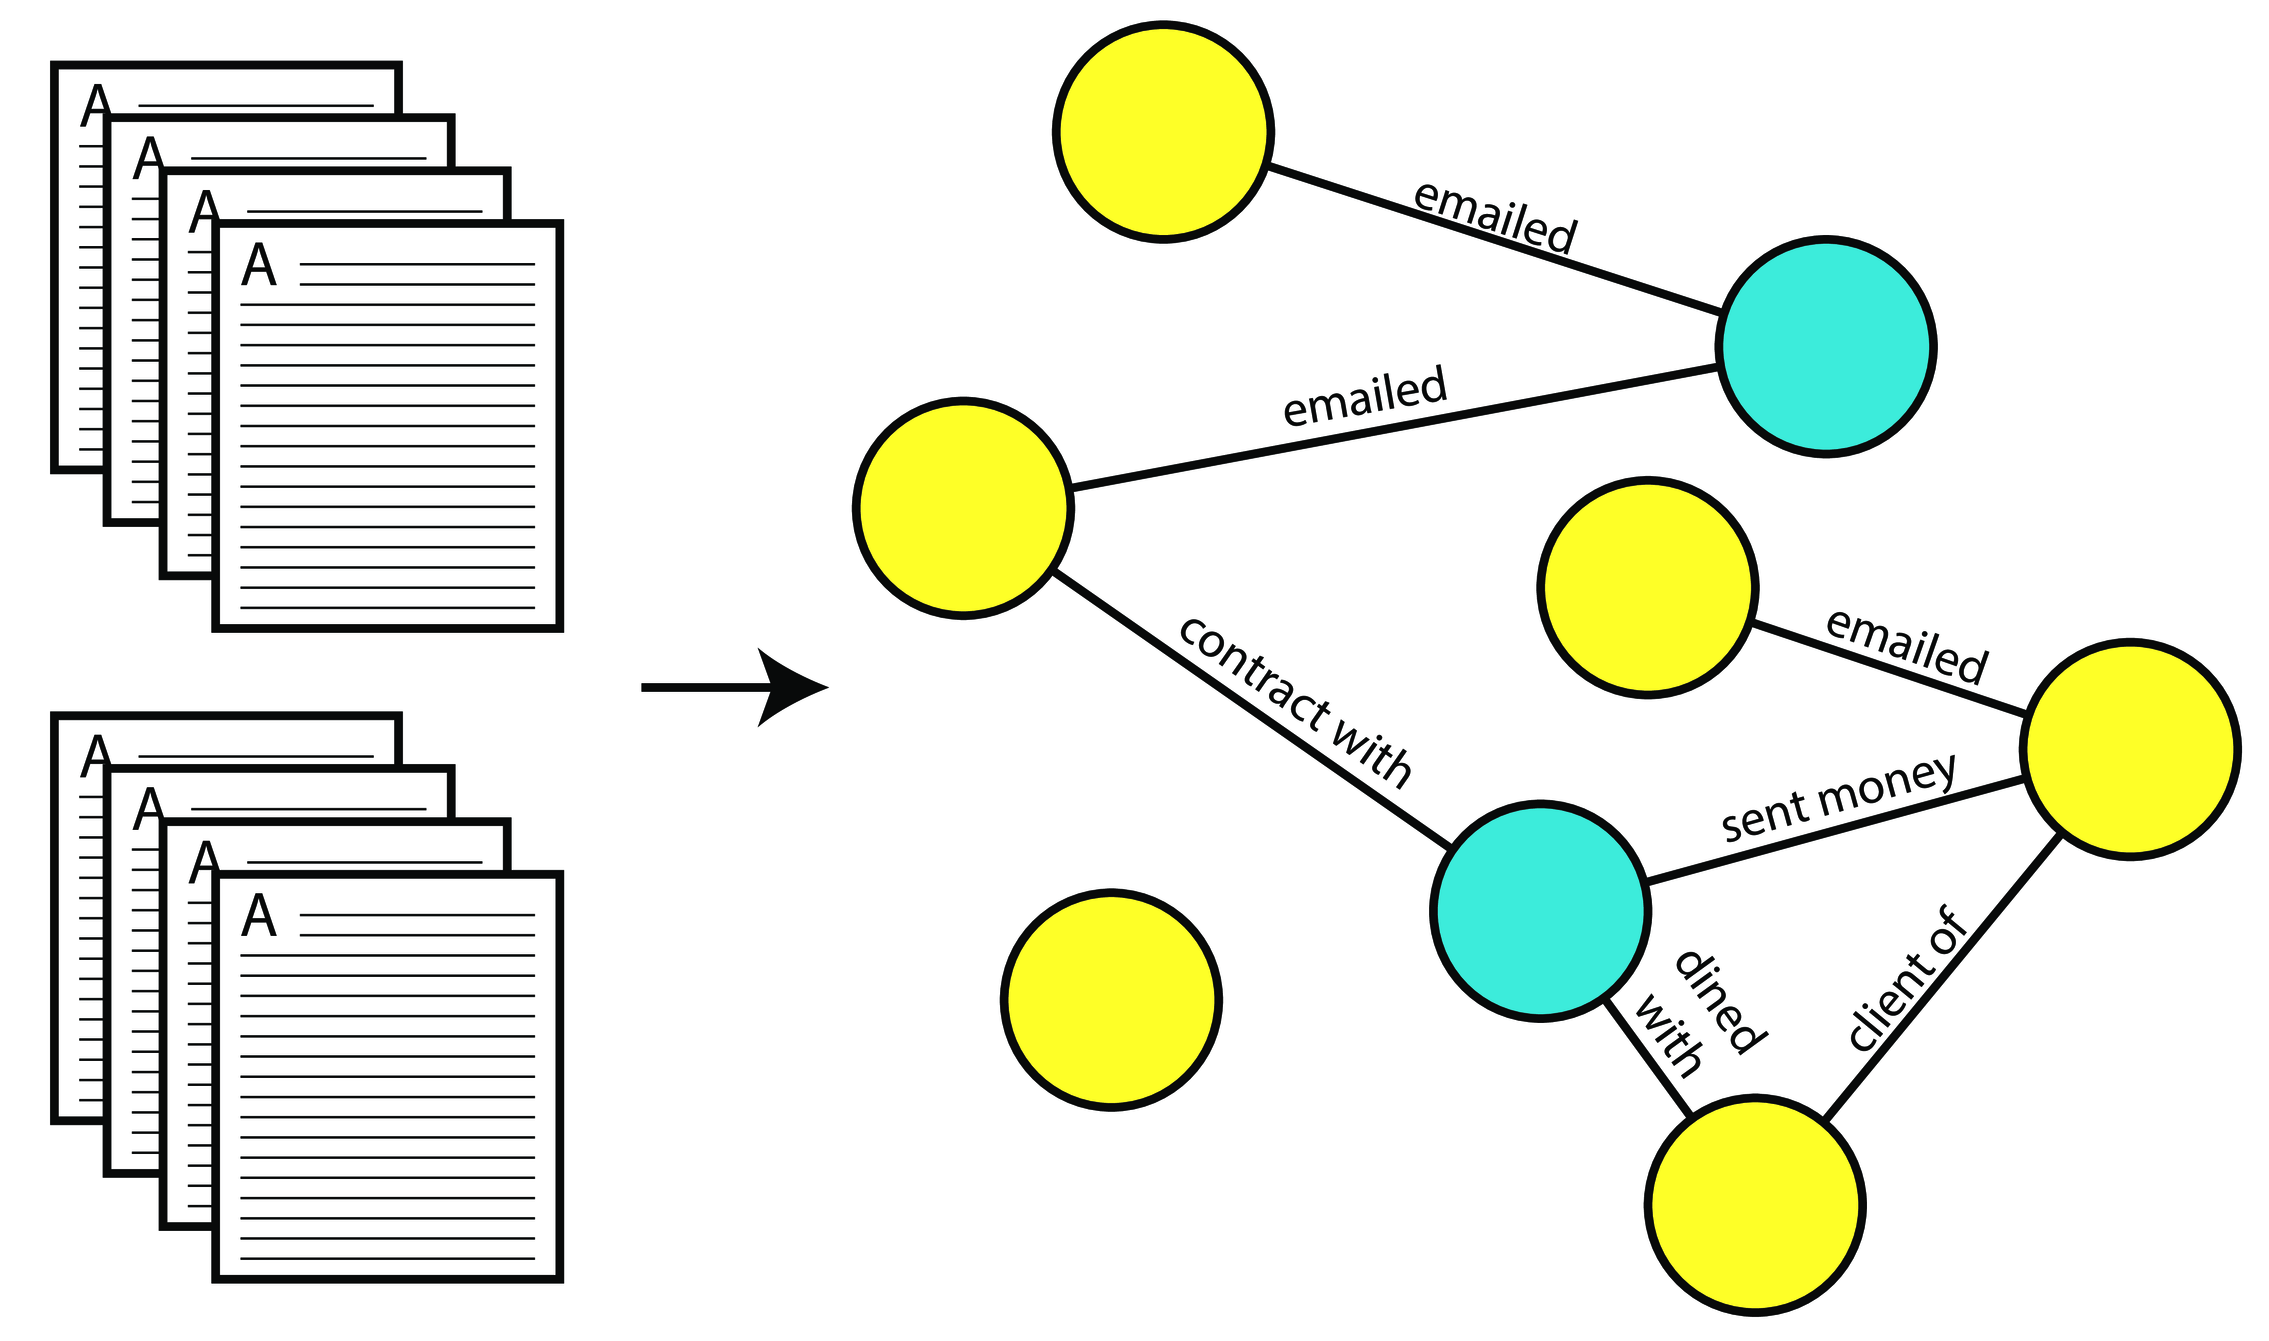 graph databases were used to show how the rich hide their money.